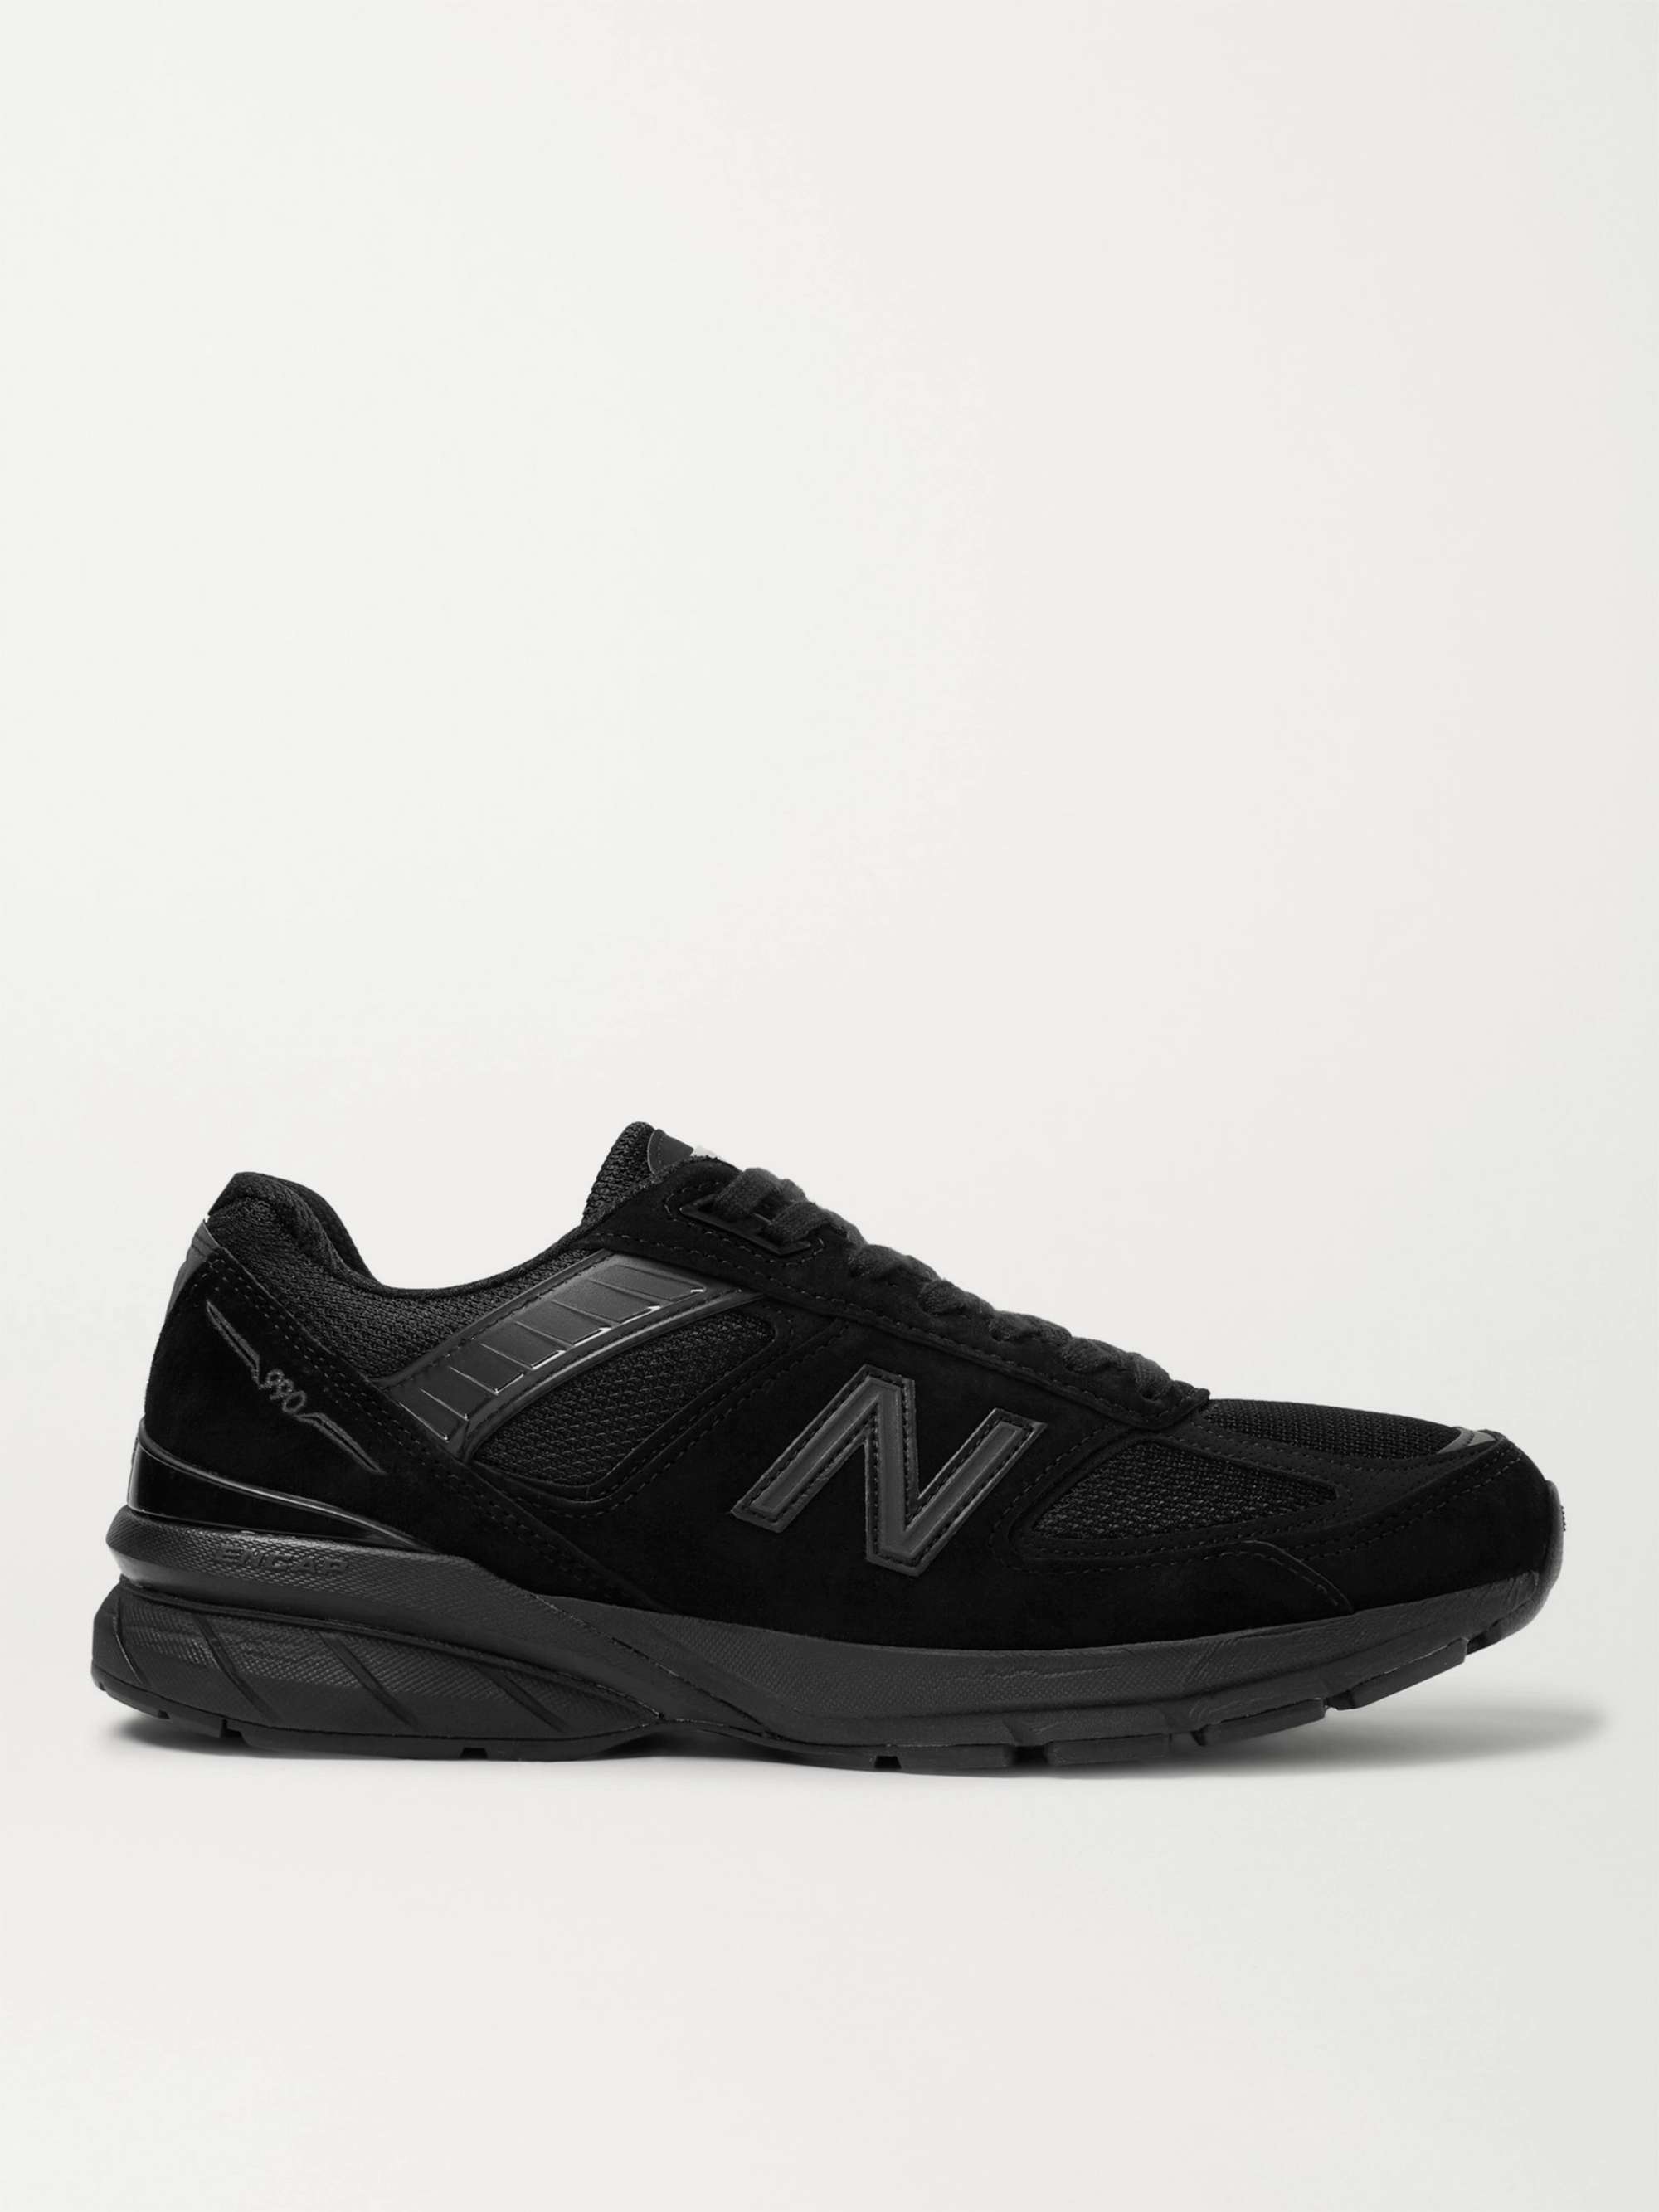 NEW BALANCE M990v5 Rubber-Trimmed Suede and Mesh Running Sneakers